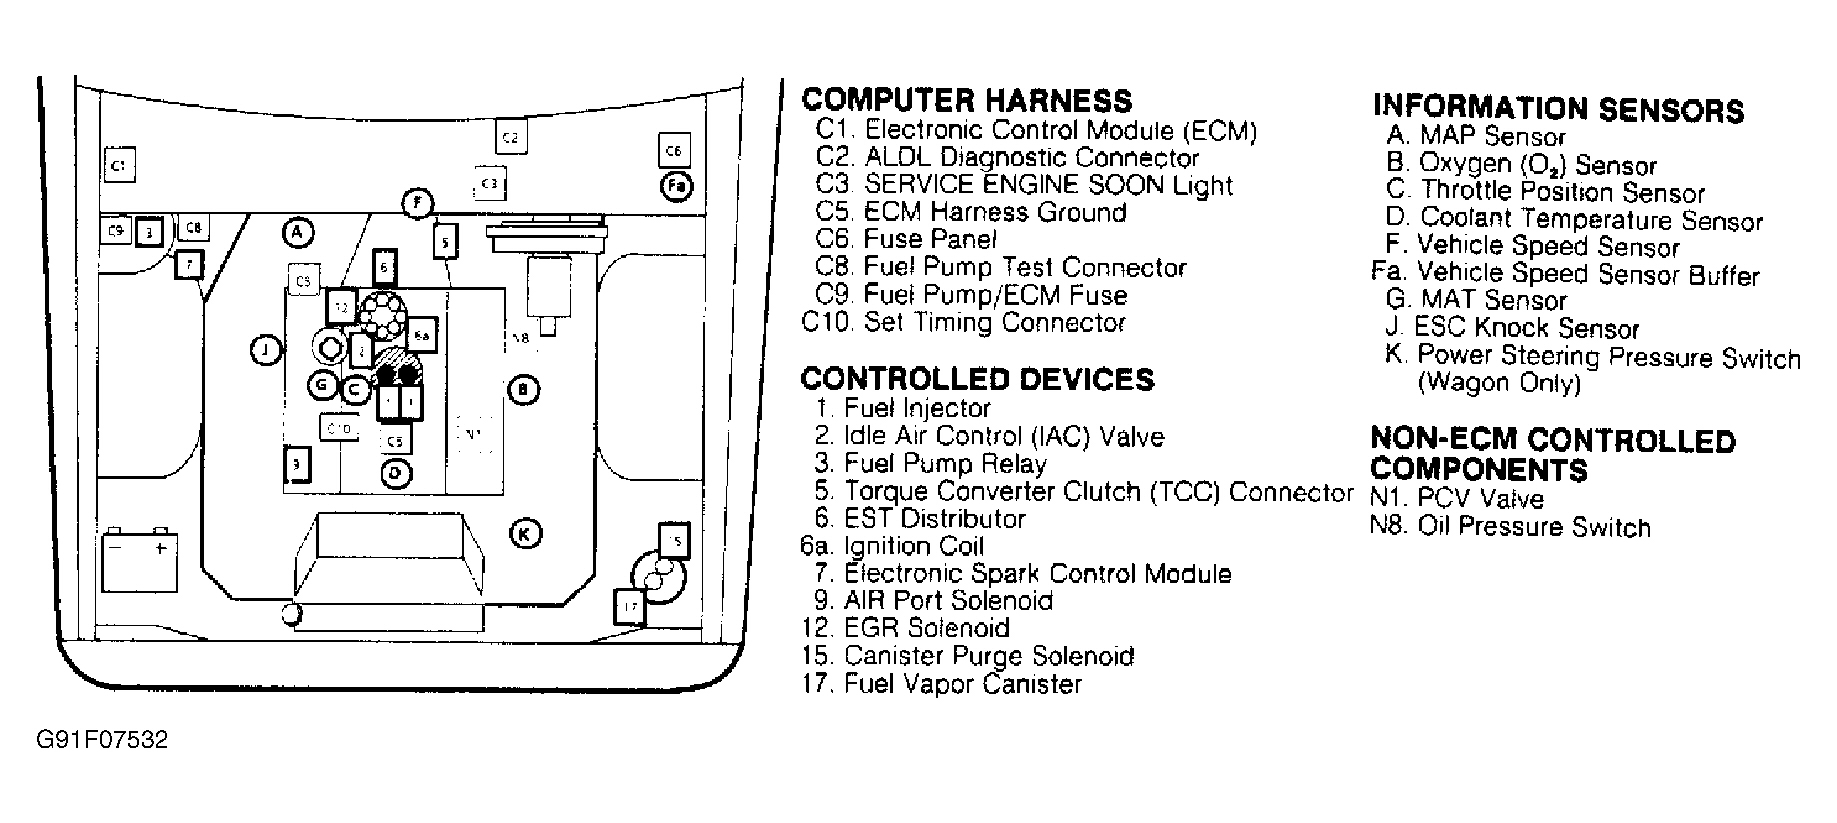 Chevrolet Caprice 1991 - Component Locations -  Component Locations (1 Of 3)